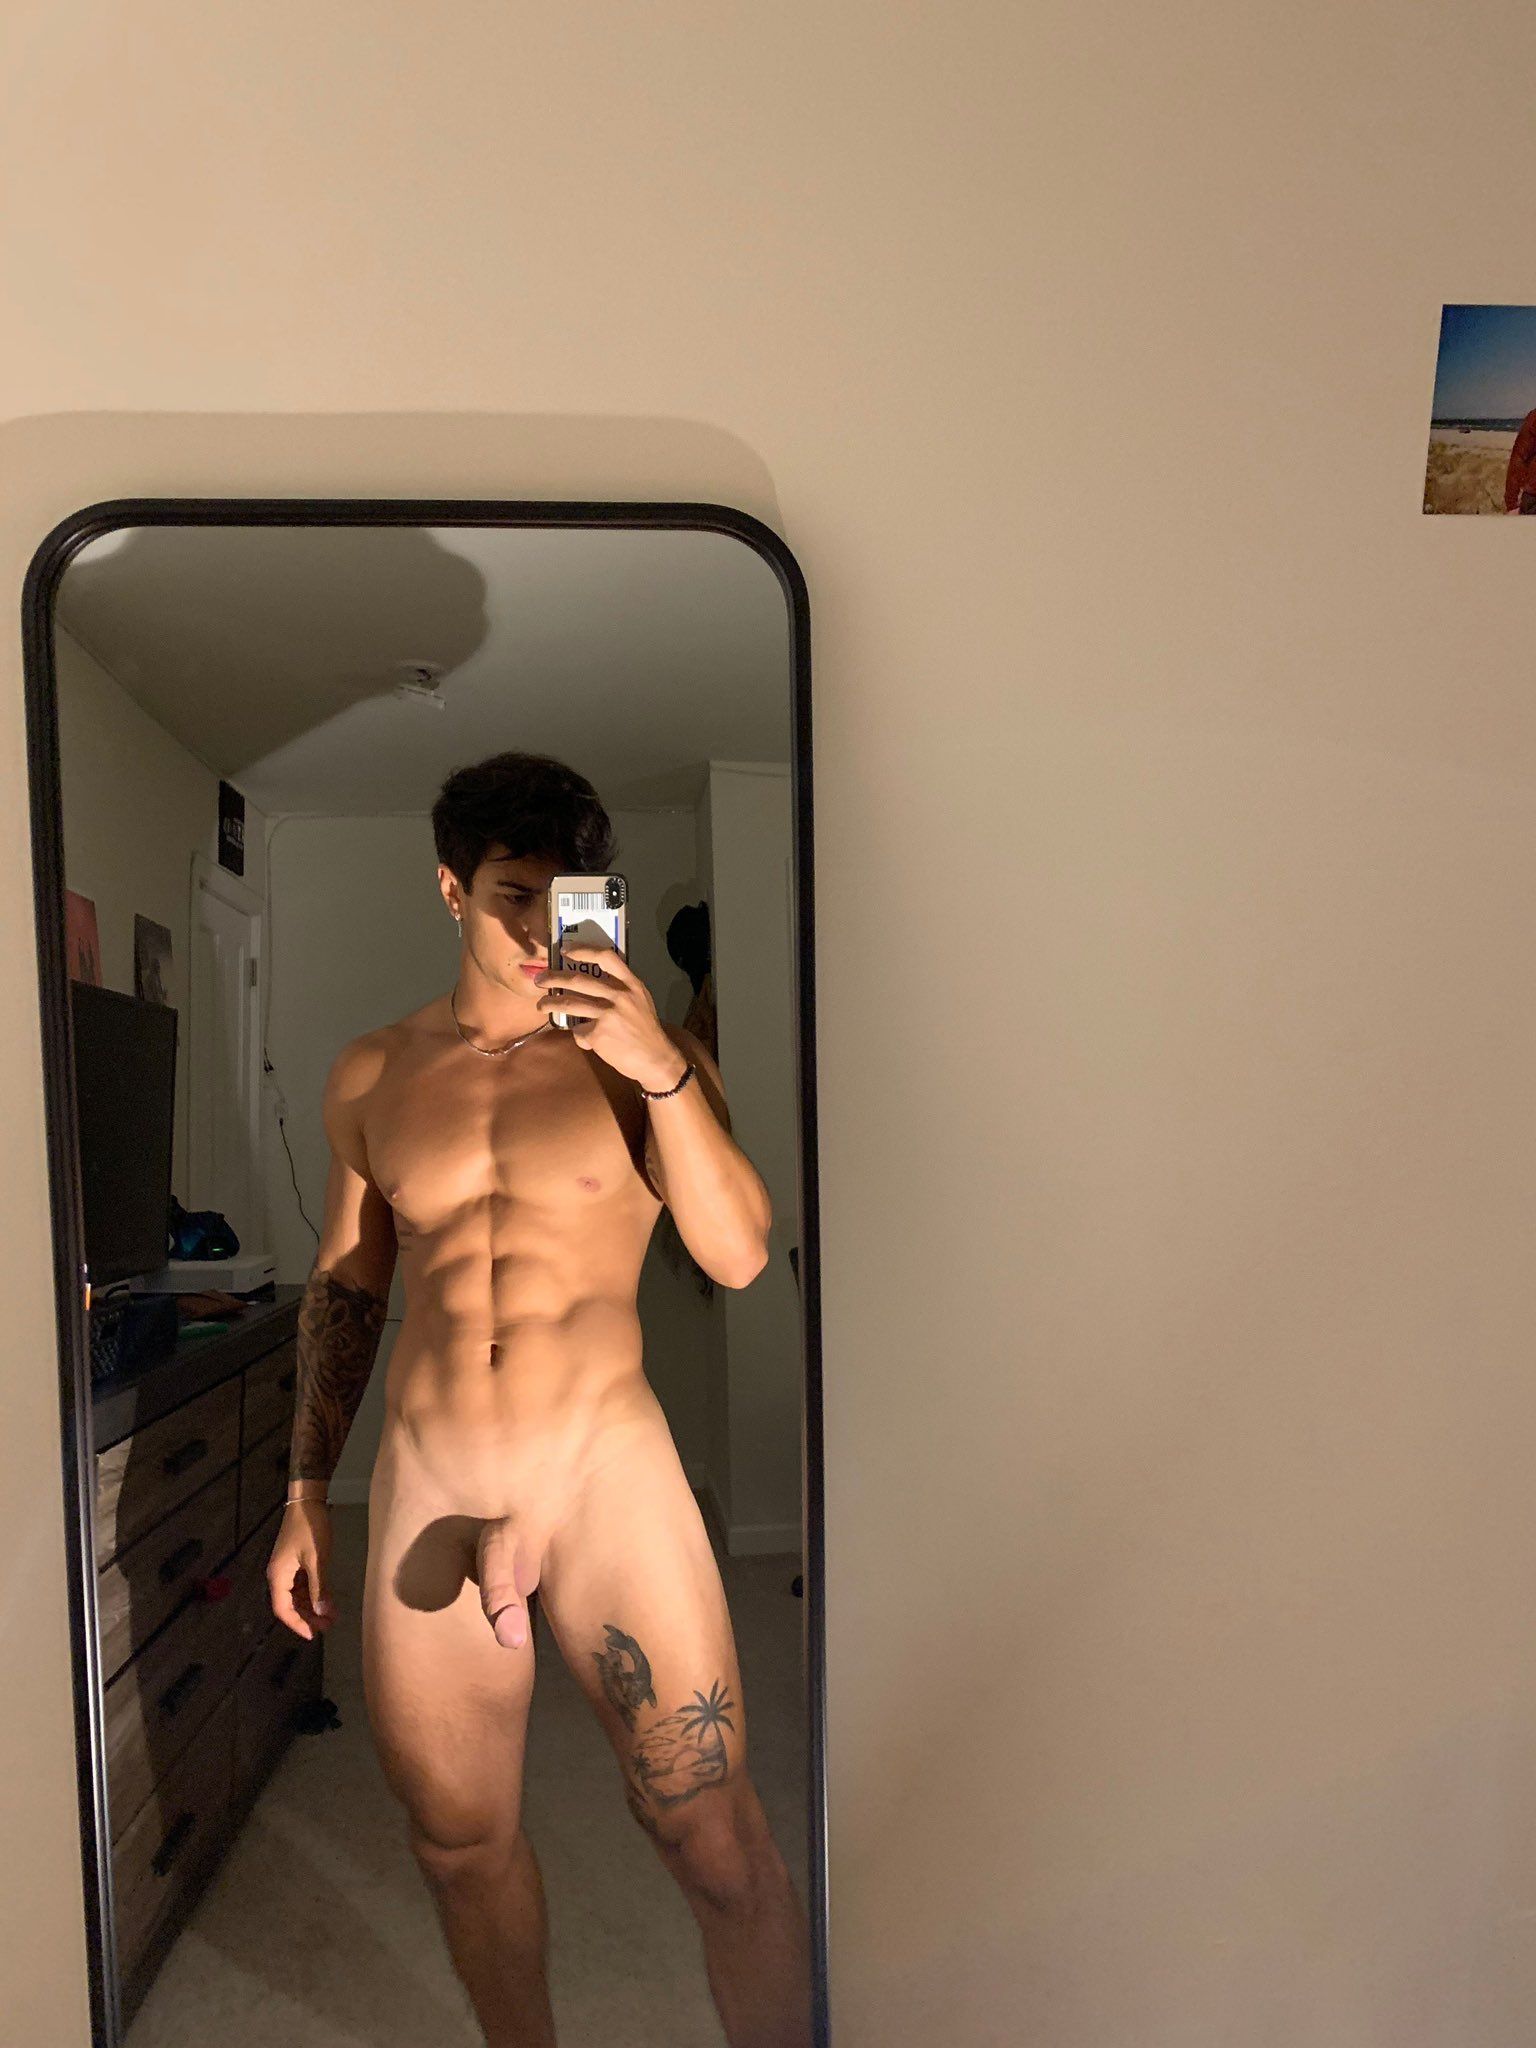 Nick and pierre nudes 👉 👌 OnlyFans - Nick Champa and Pierre 